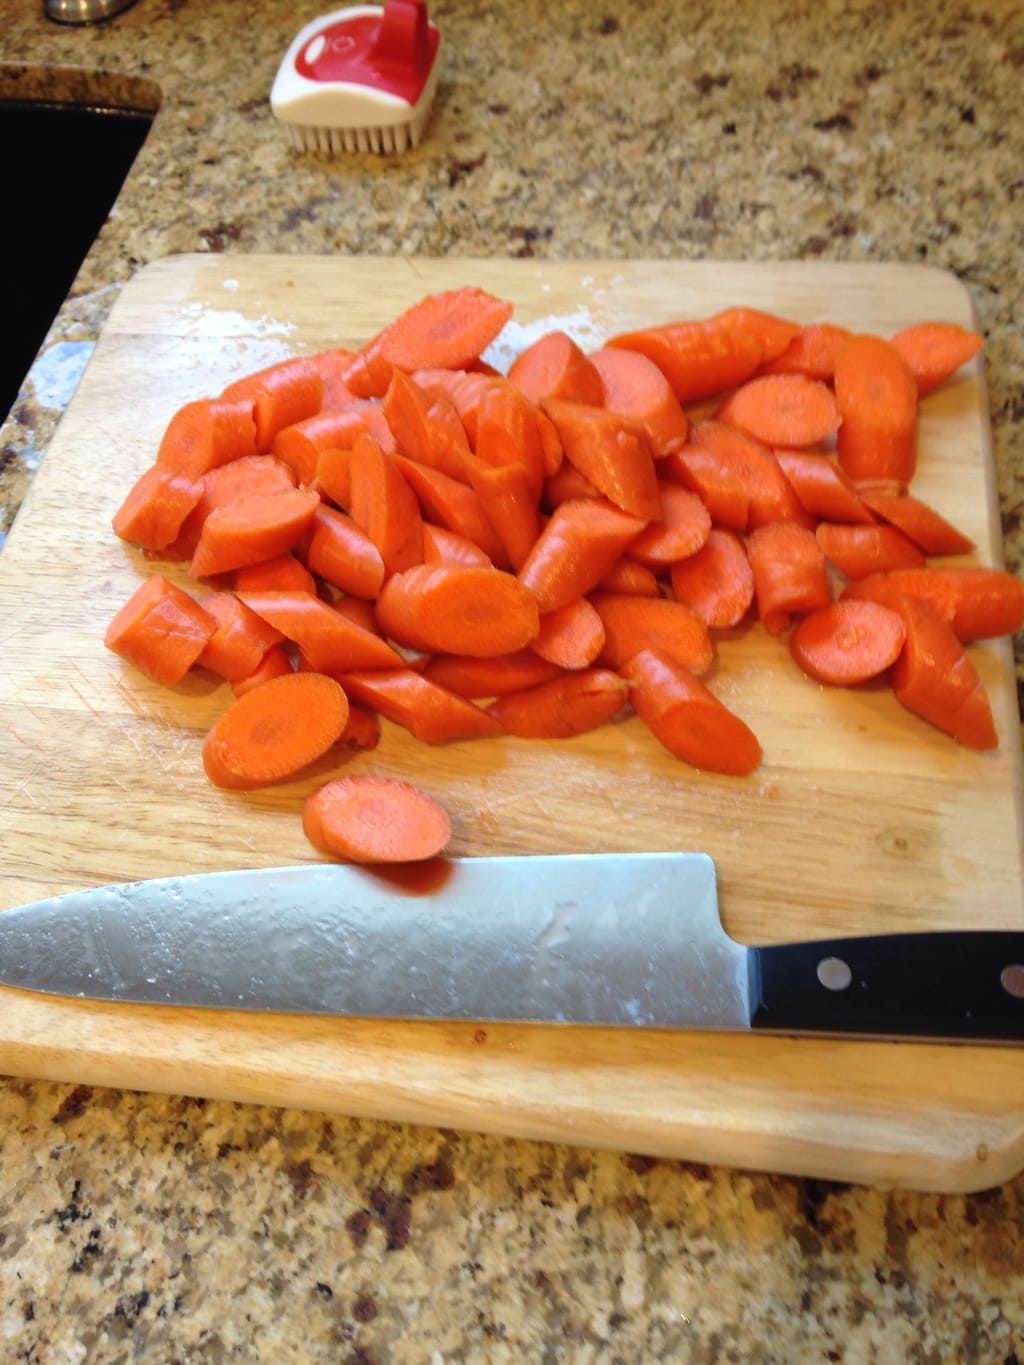 A cutting board with sliced carrots, ready to be roasted.